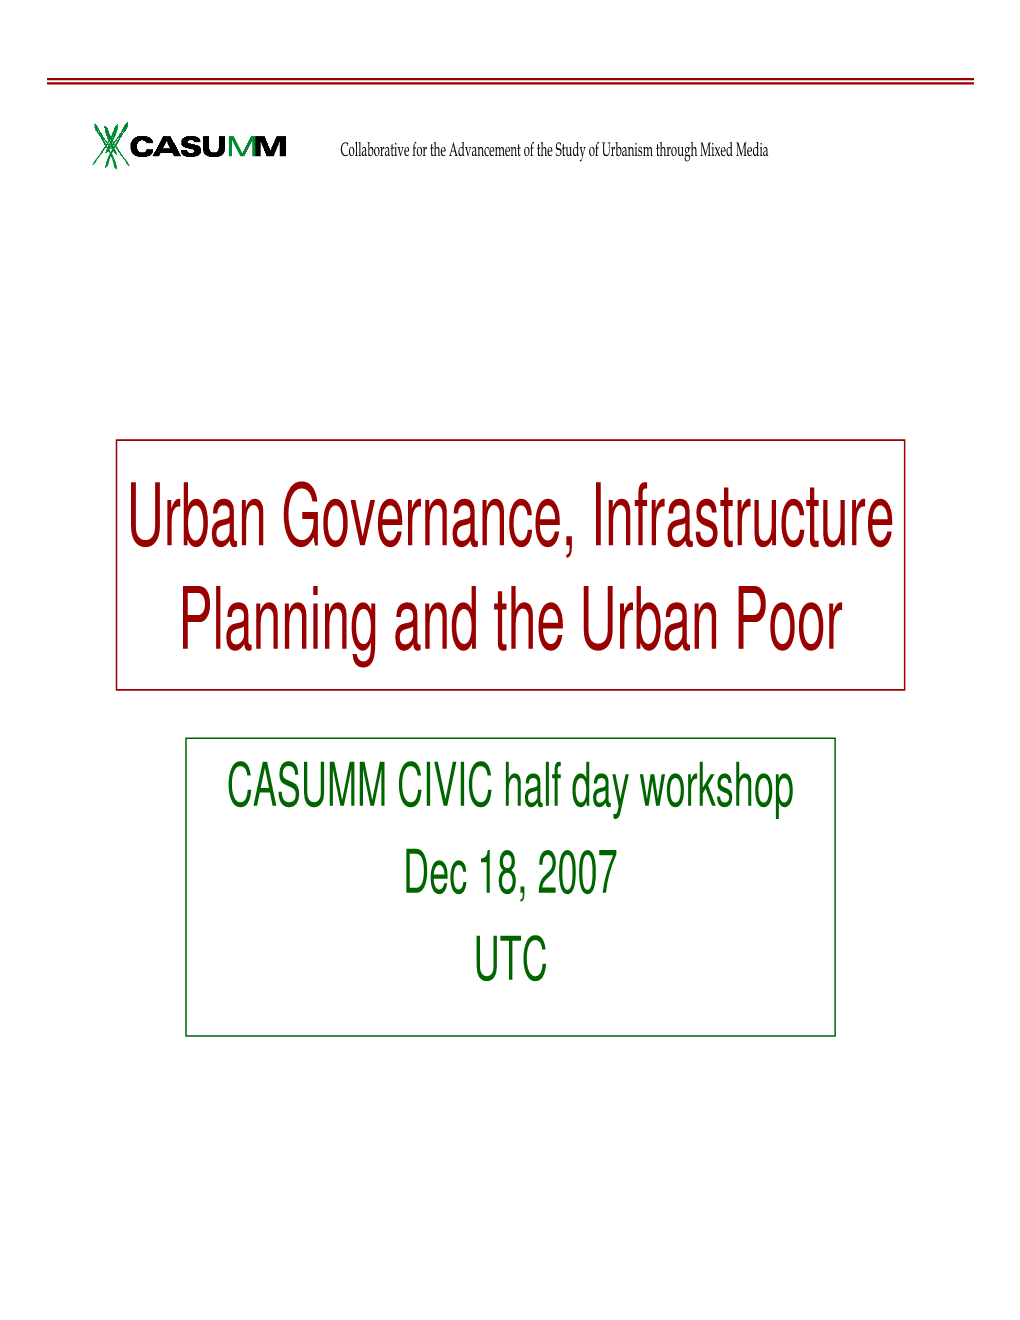 Urban Governance, Infrastructure Planning and the Urban Poor